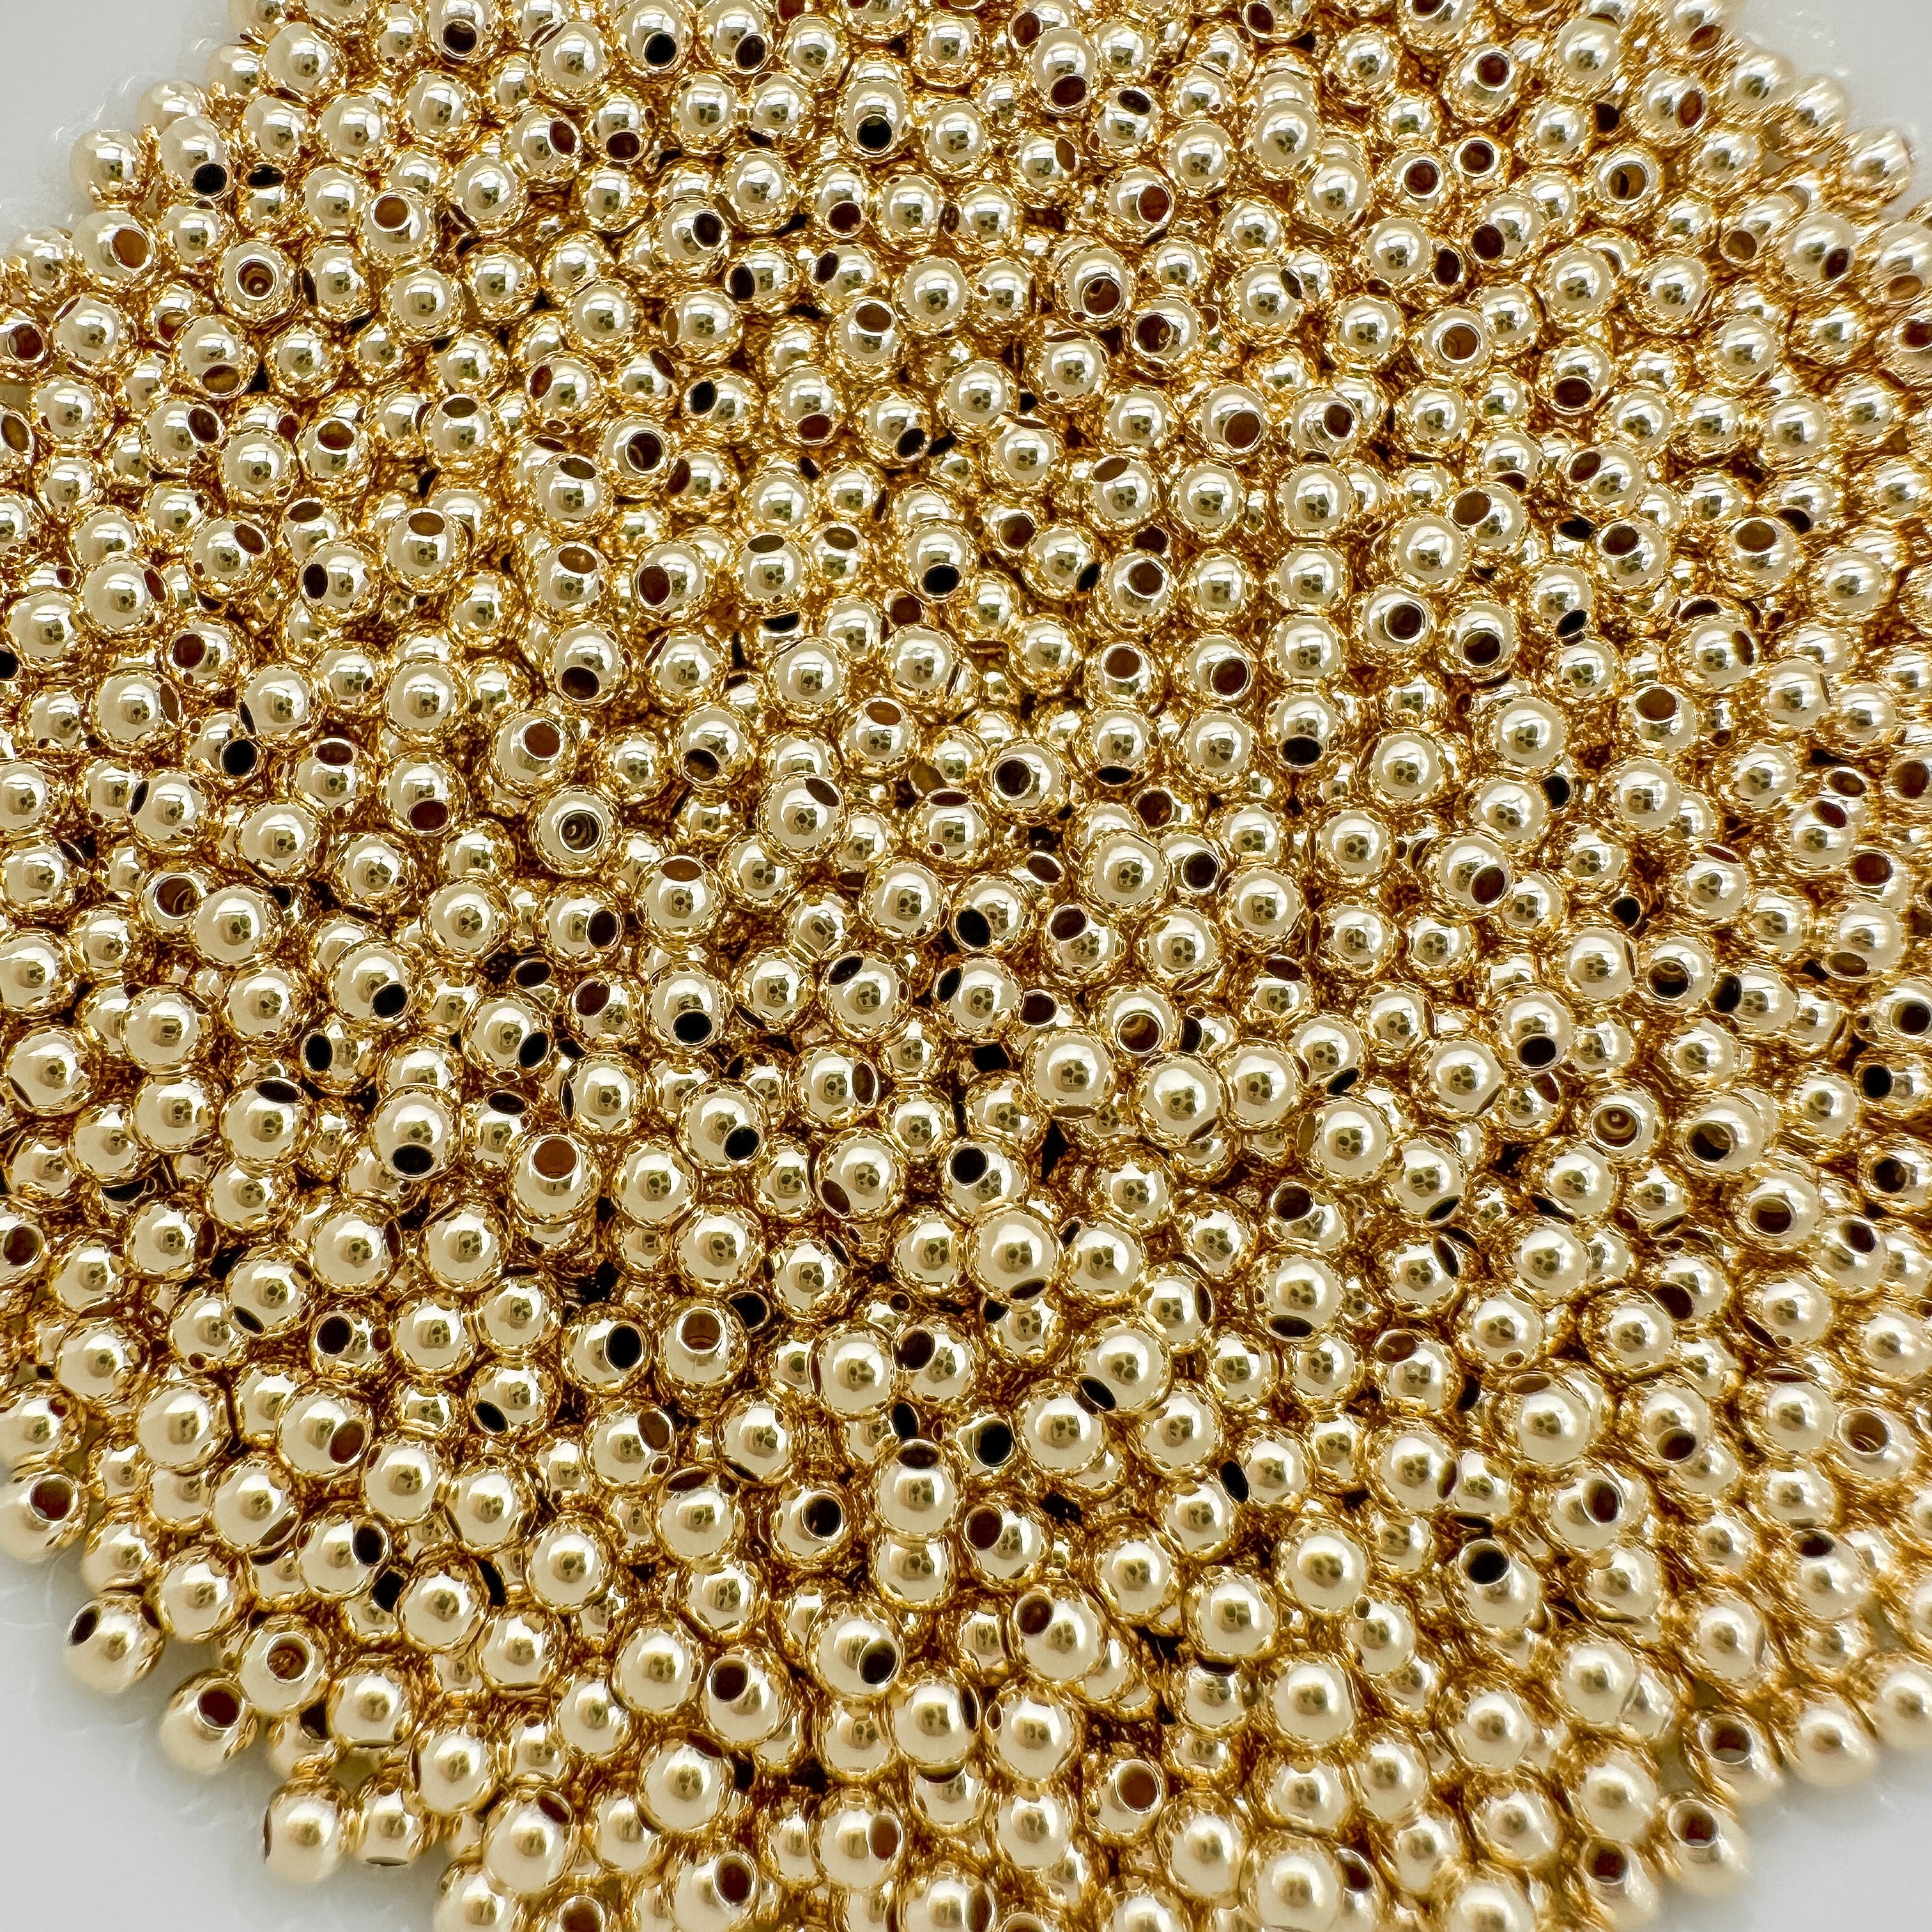 2mm round gold filled beads / wholesale gold filled beads / round gold filled beads 